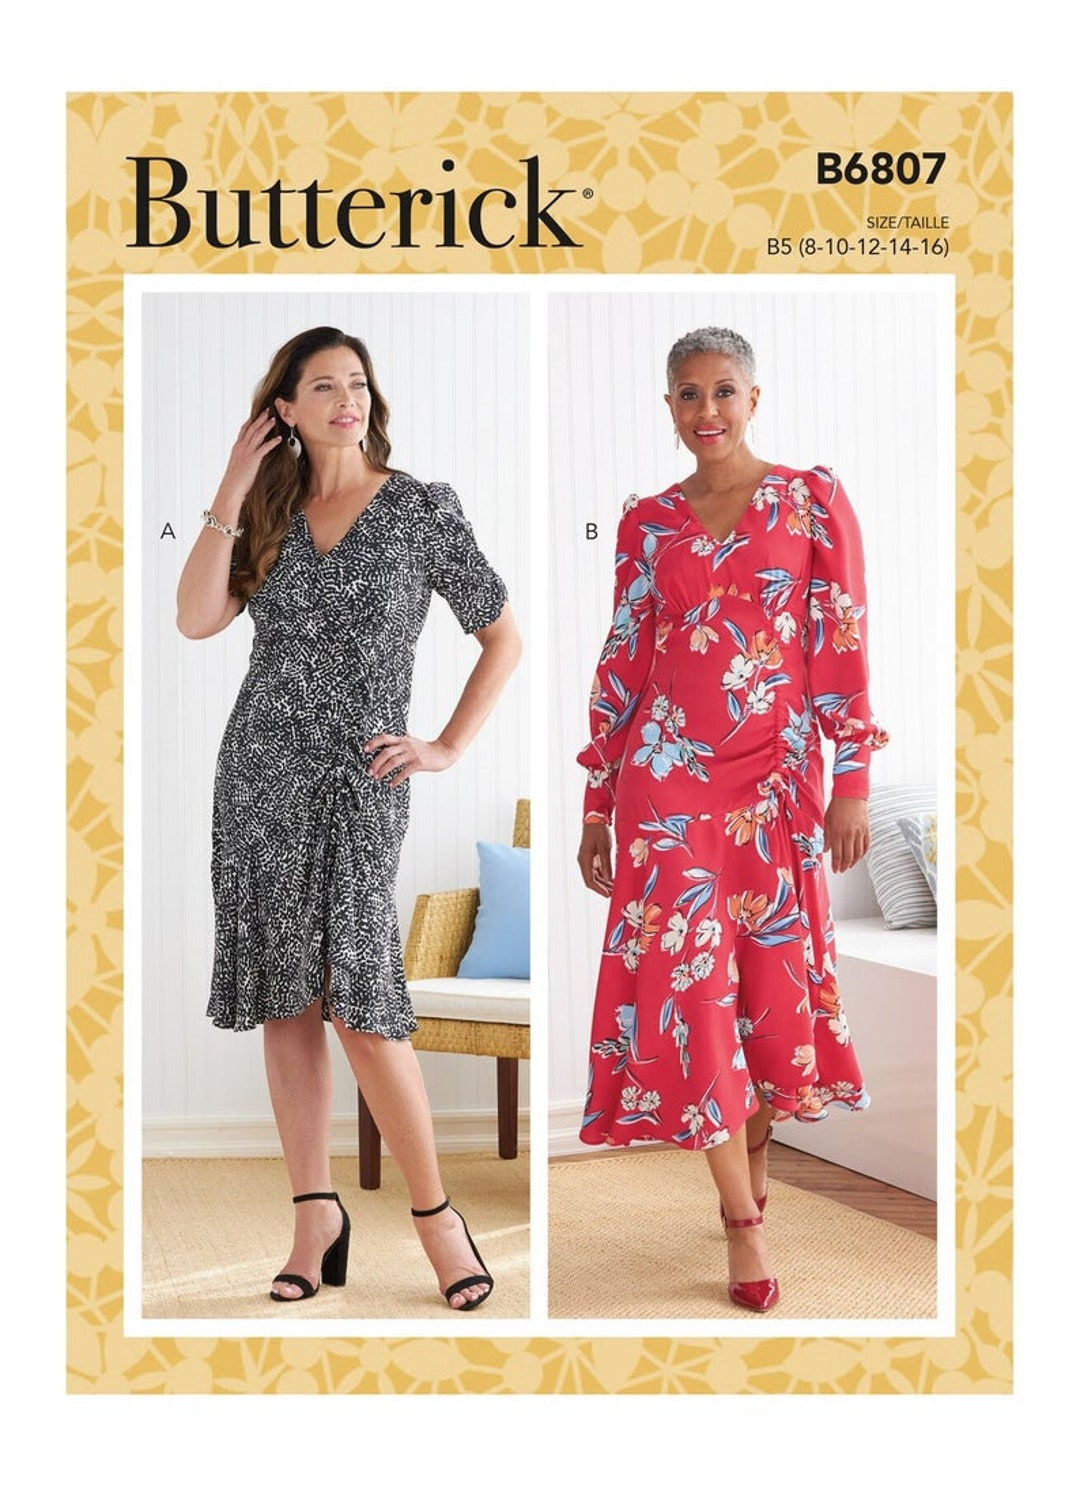 Butterick Sewing Pattern B6807 Misses' Dress - Etsy